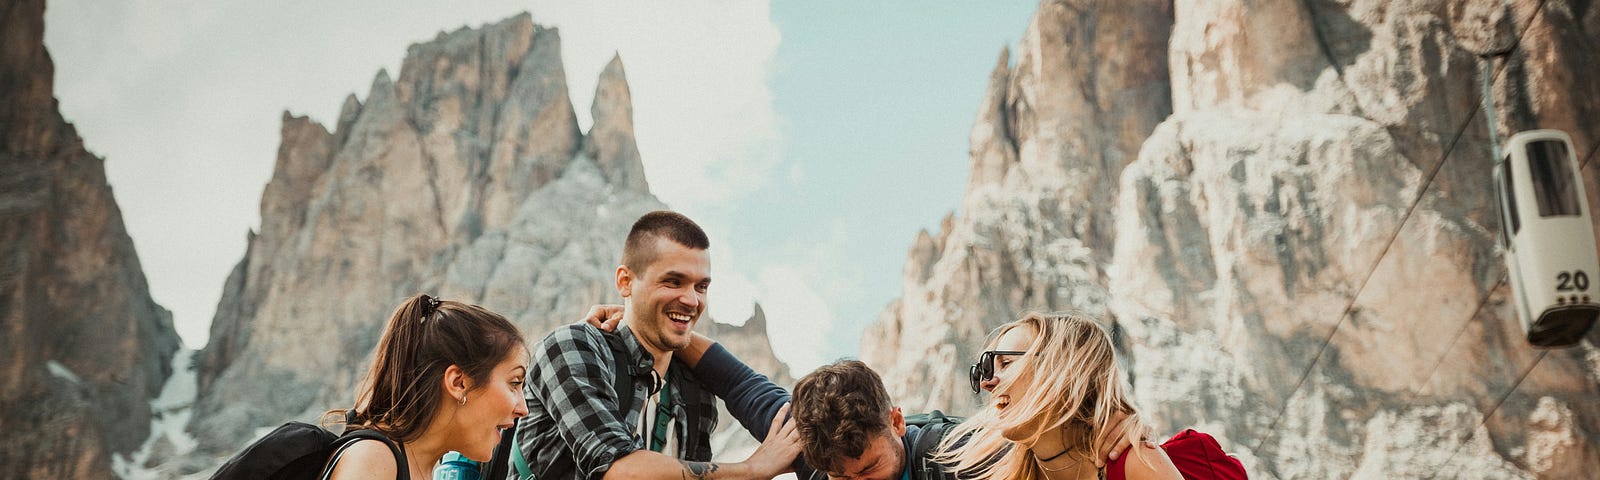 A group of people having fun and laughing while hiking.